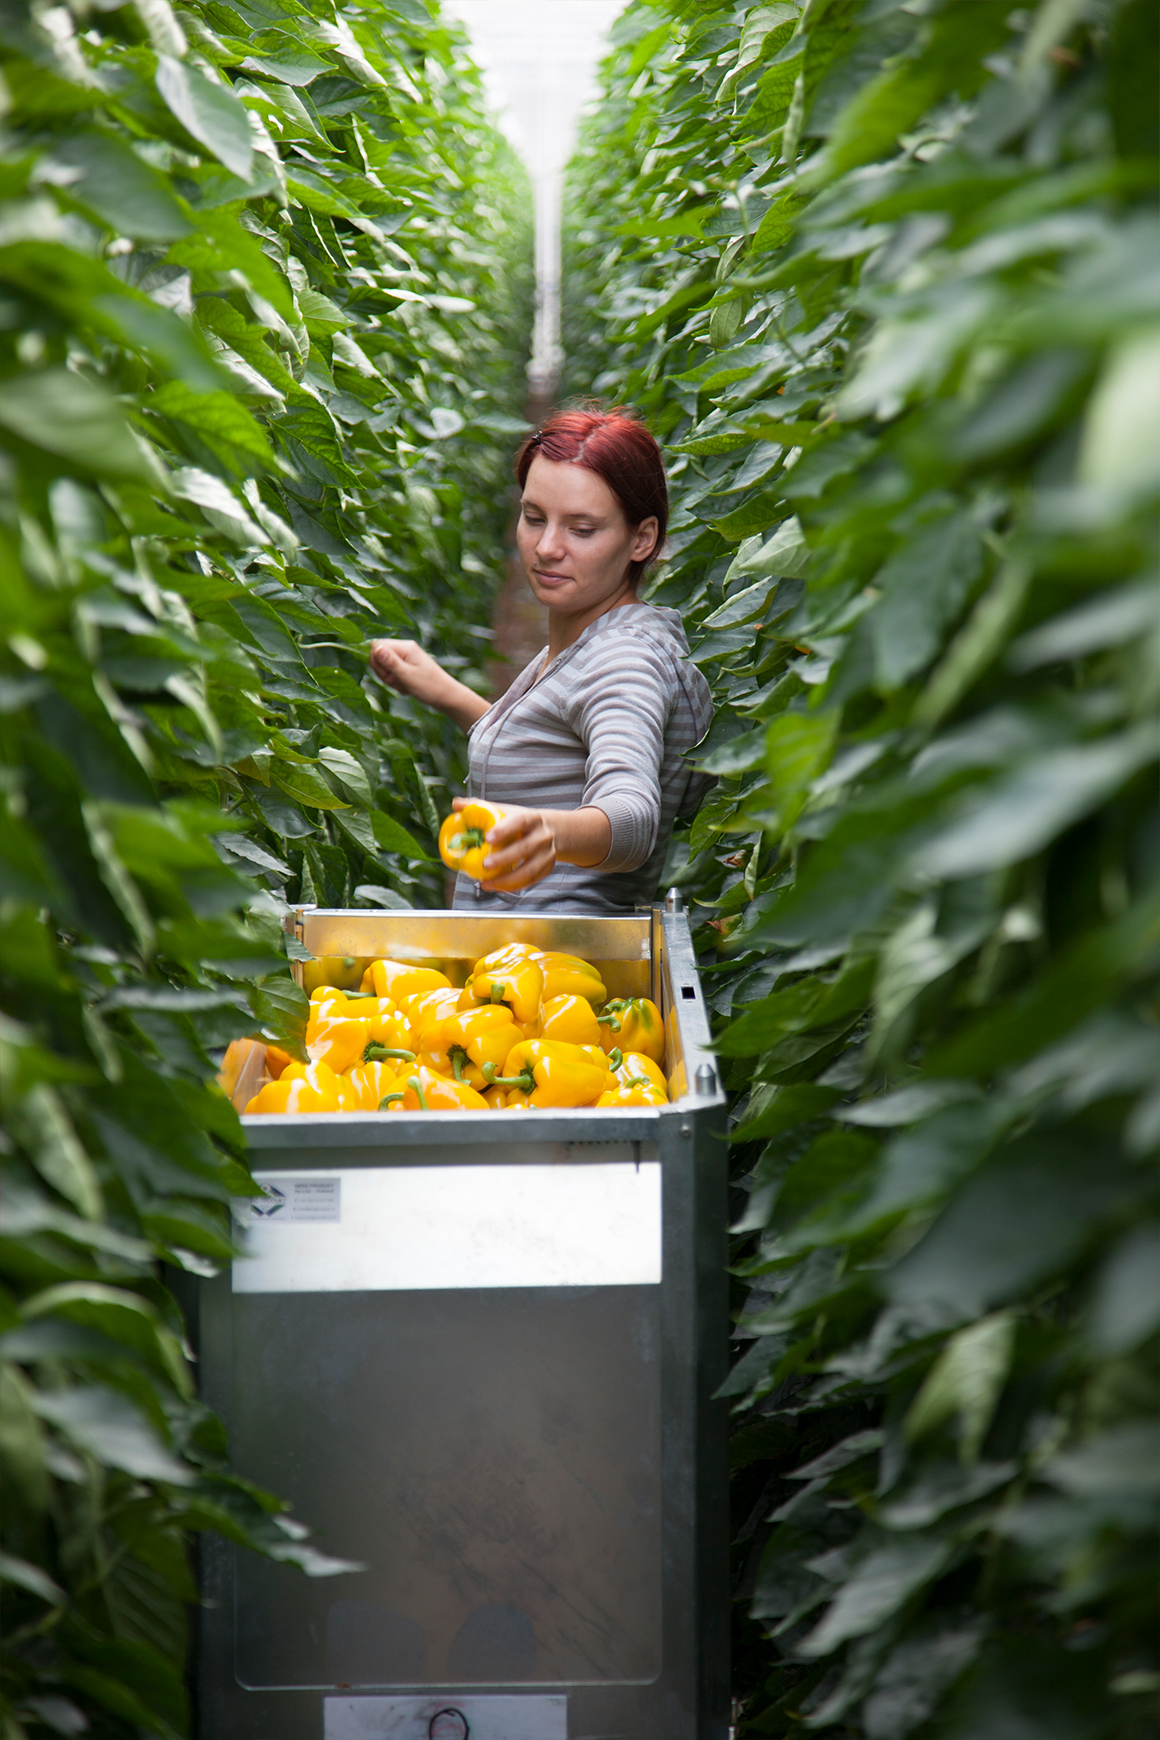 A female employee handpicking yellow peppers in a row of tall green pepper plants.